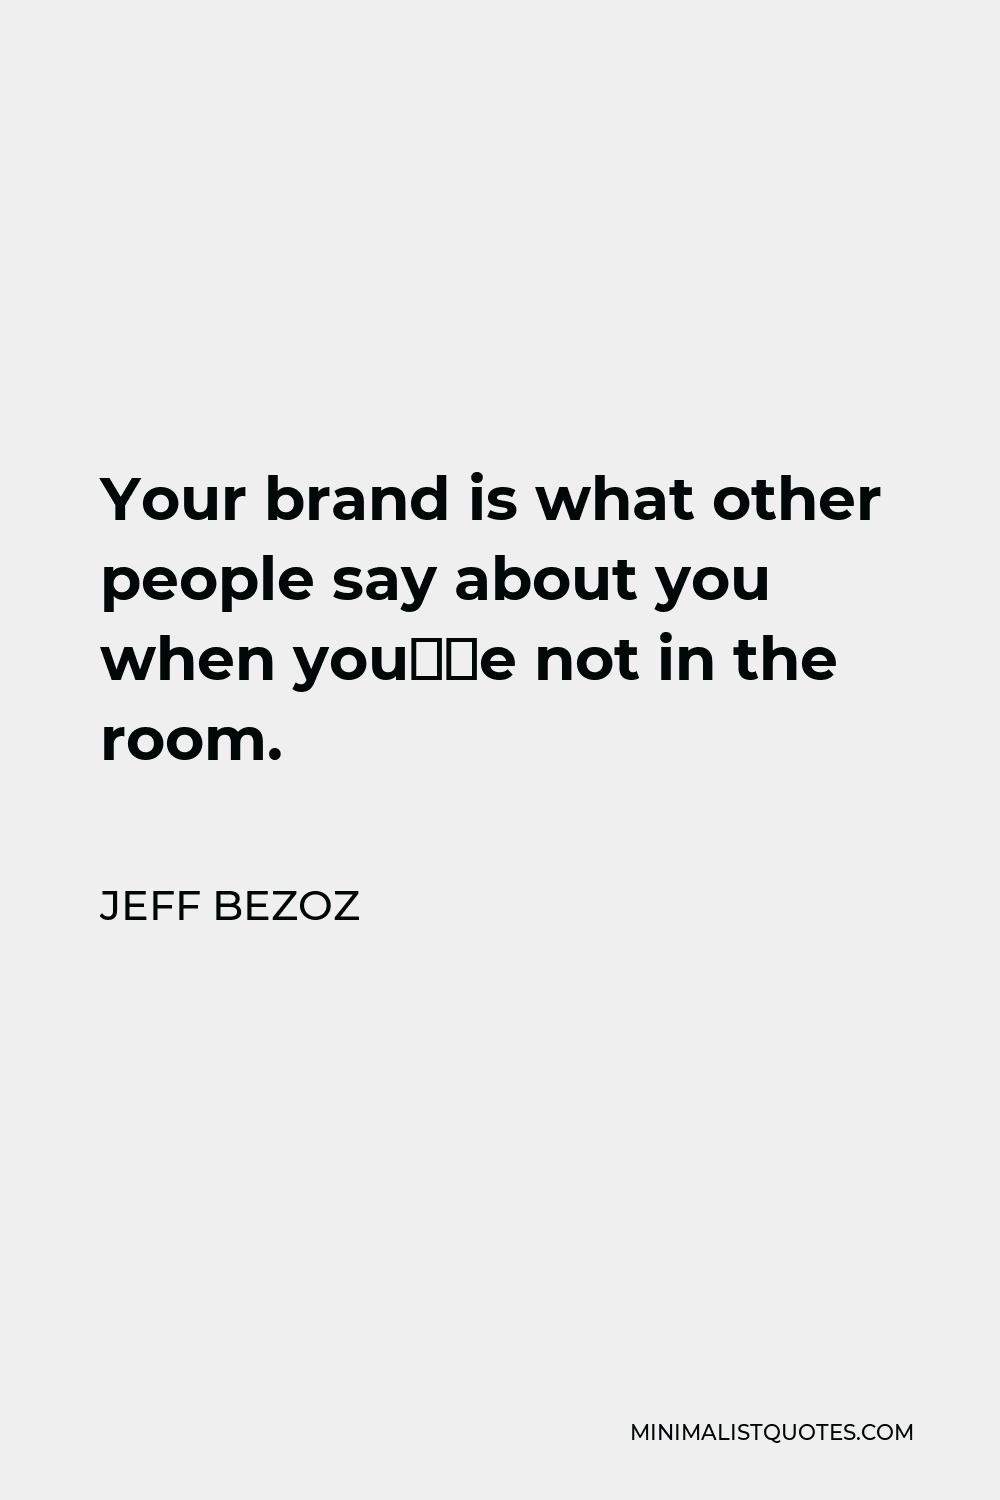 Jeff Bezoz Quote - Your brand is what other people say about you when you’re not in the room.